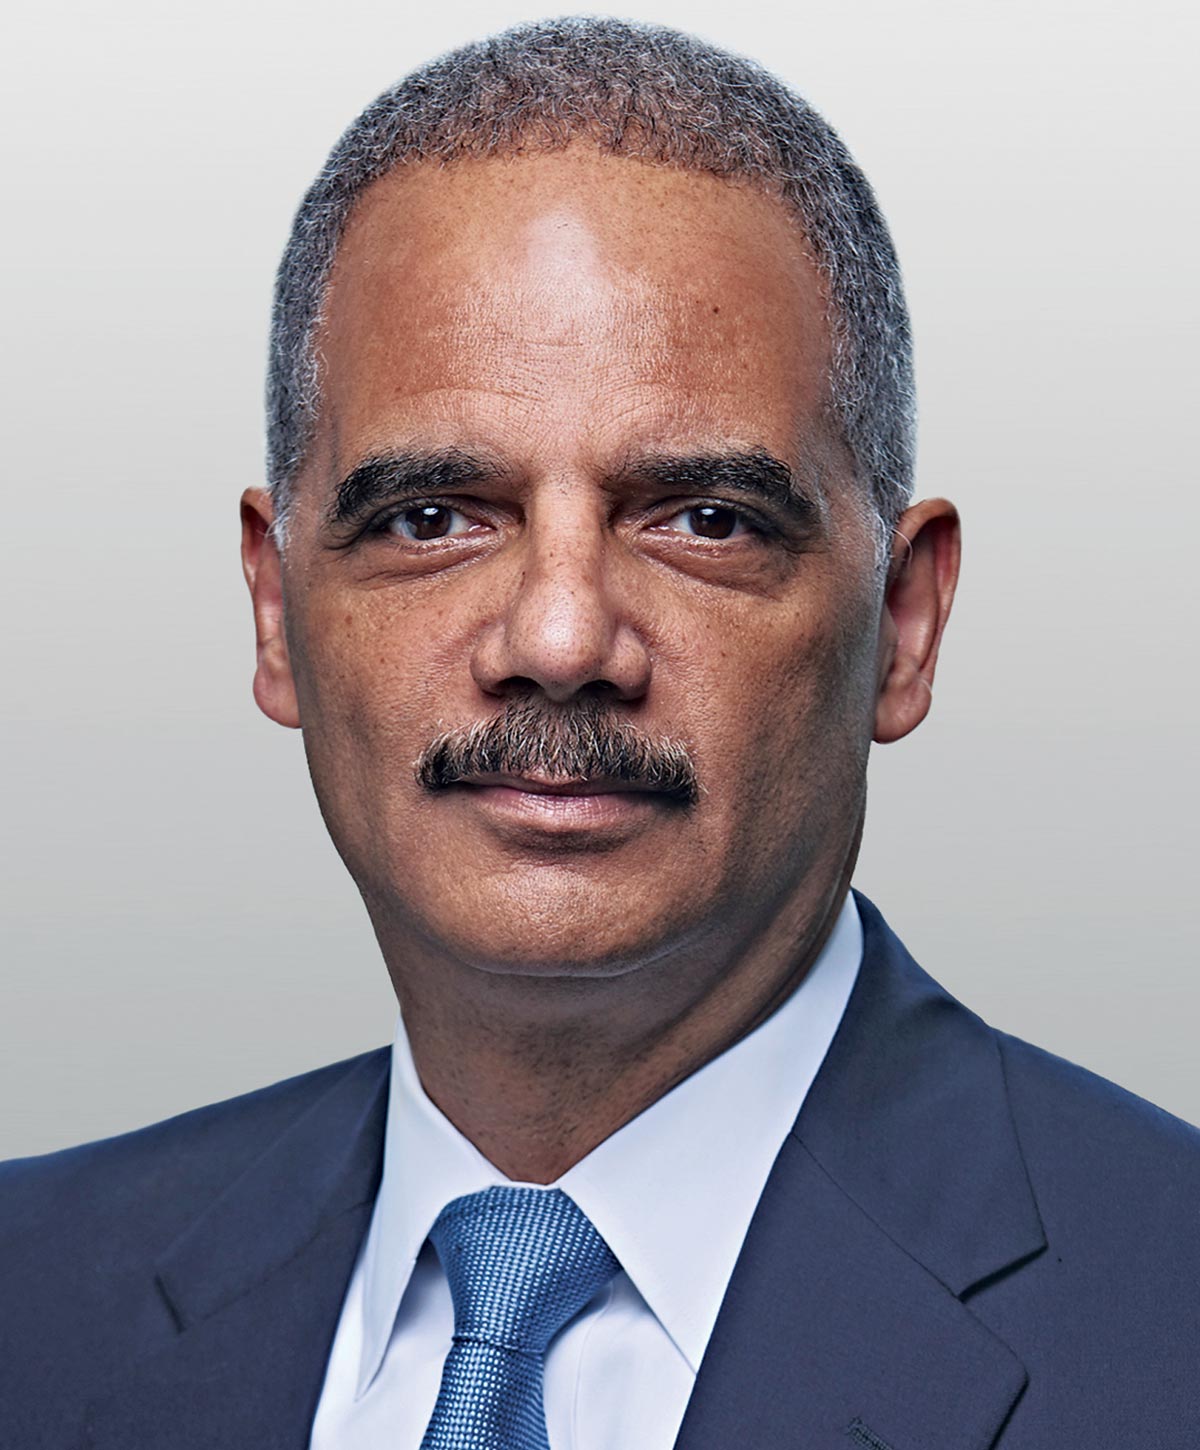 Headshot of Eric Holder wearing a suit with a blue tie